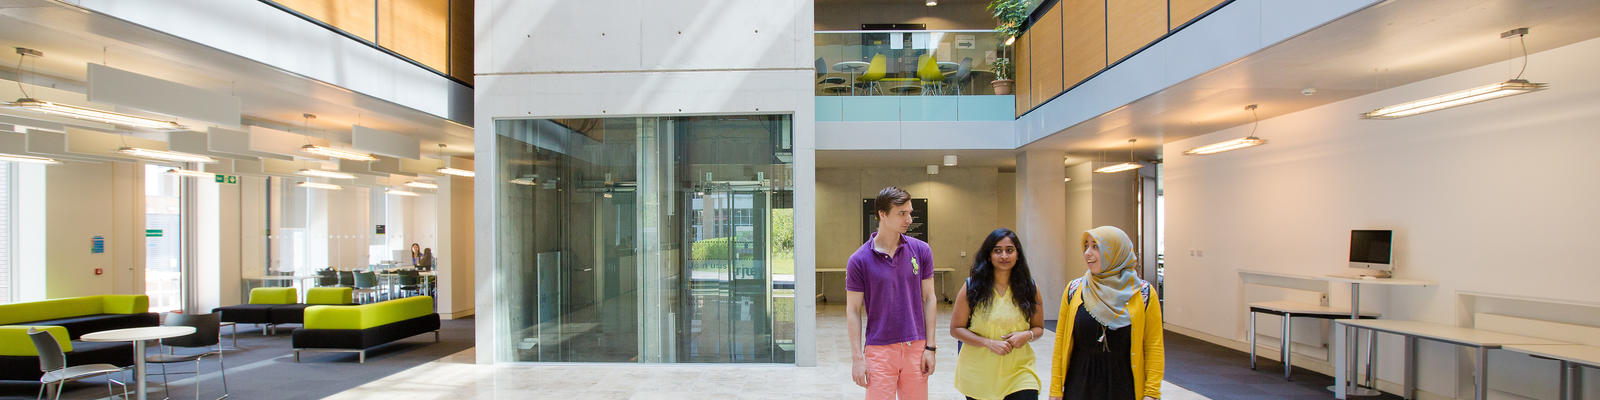 Students talking while walking in a building